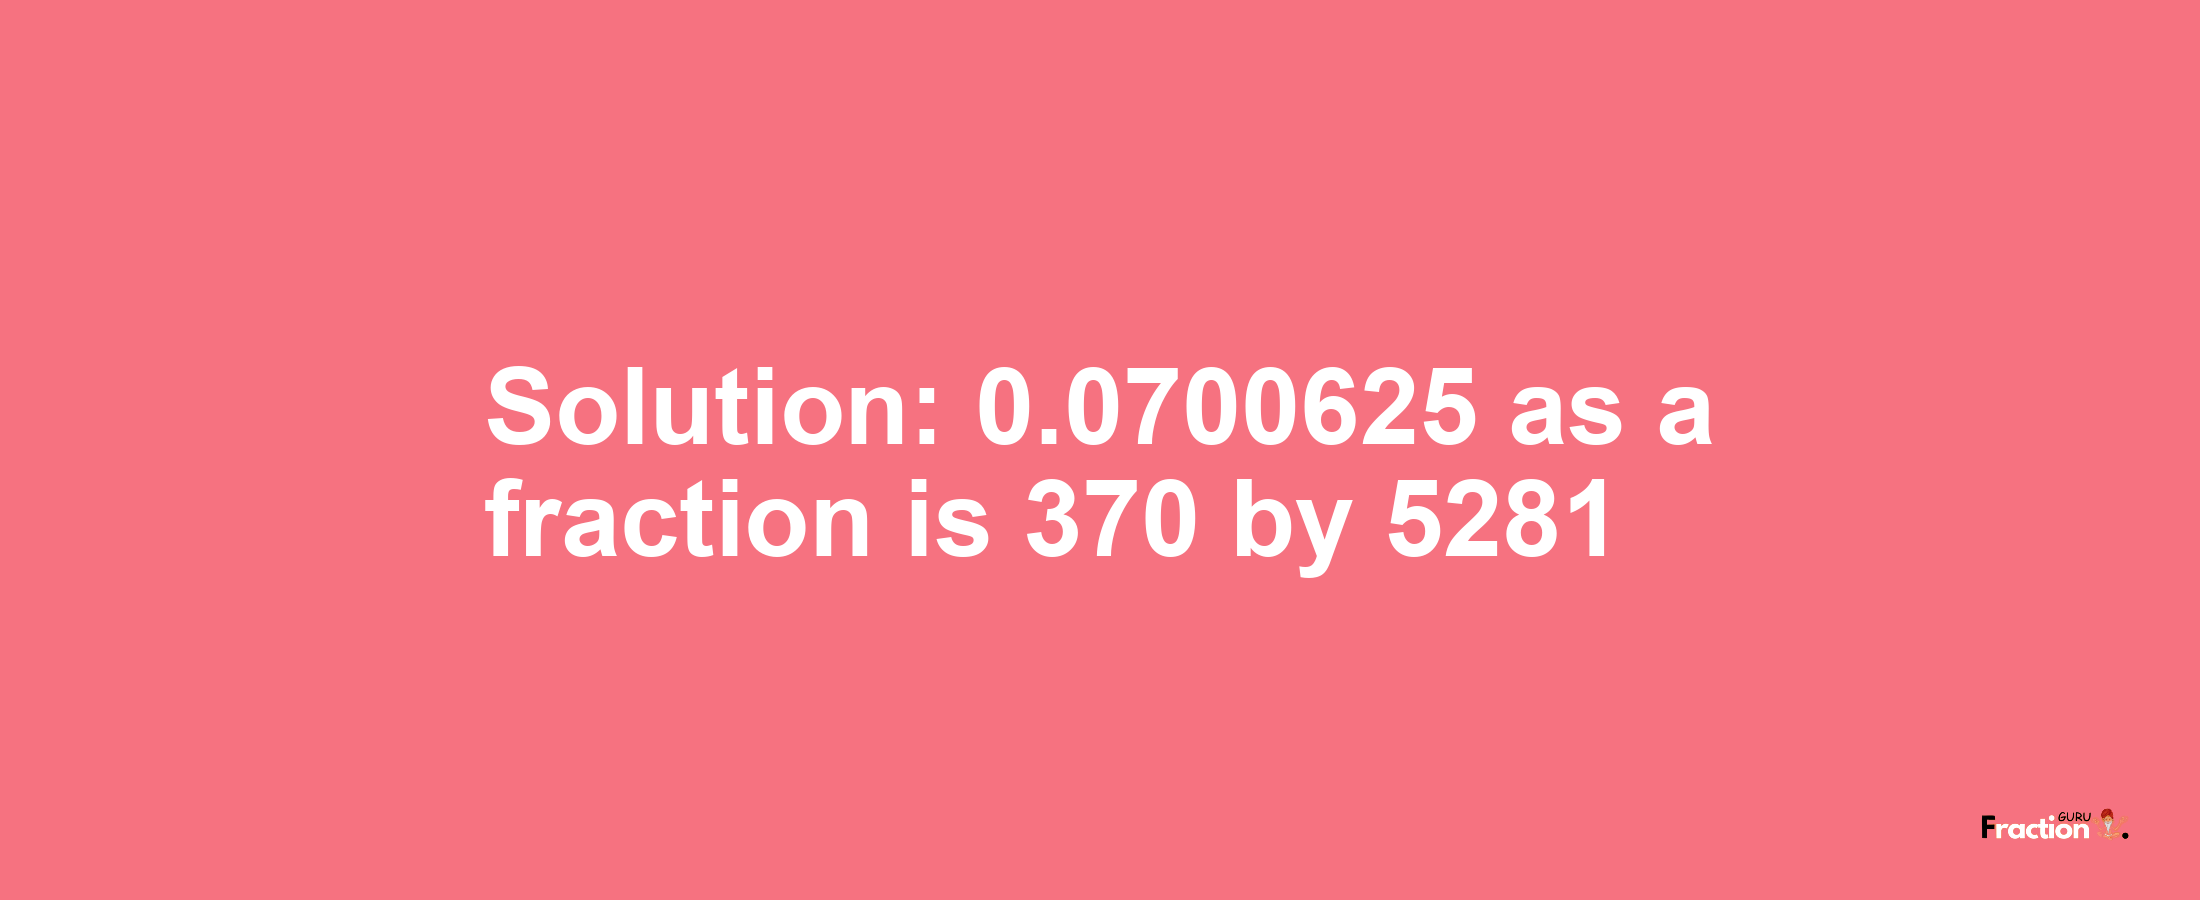 Solution:0.0700625 as a fraction is 370/5281